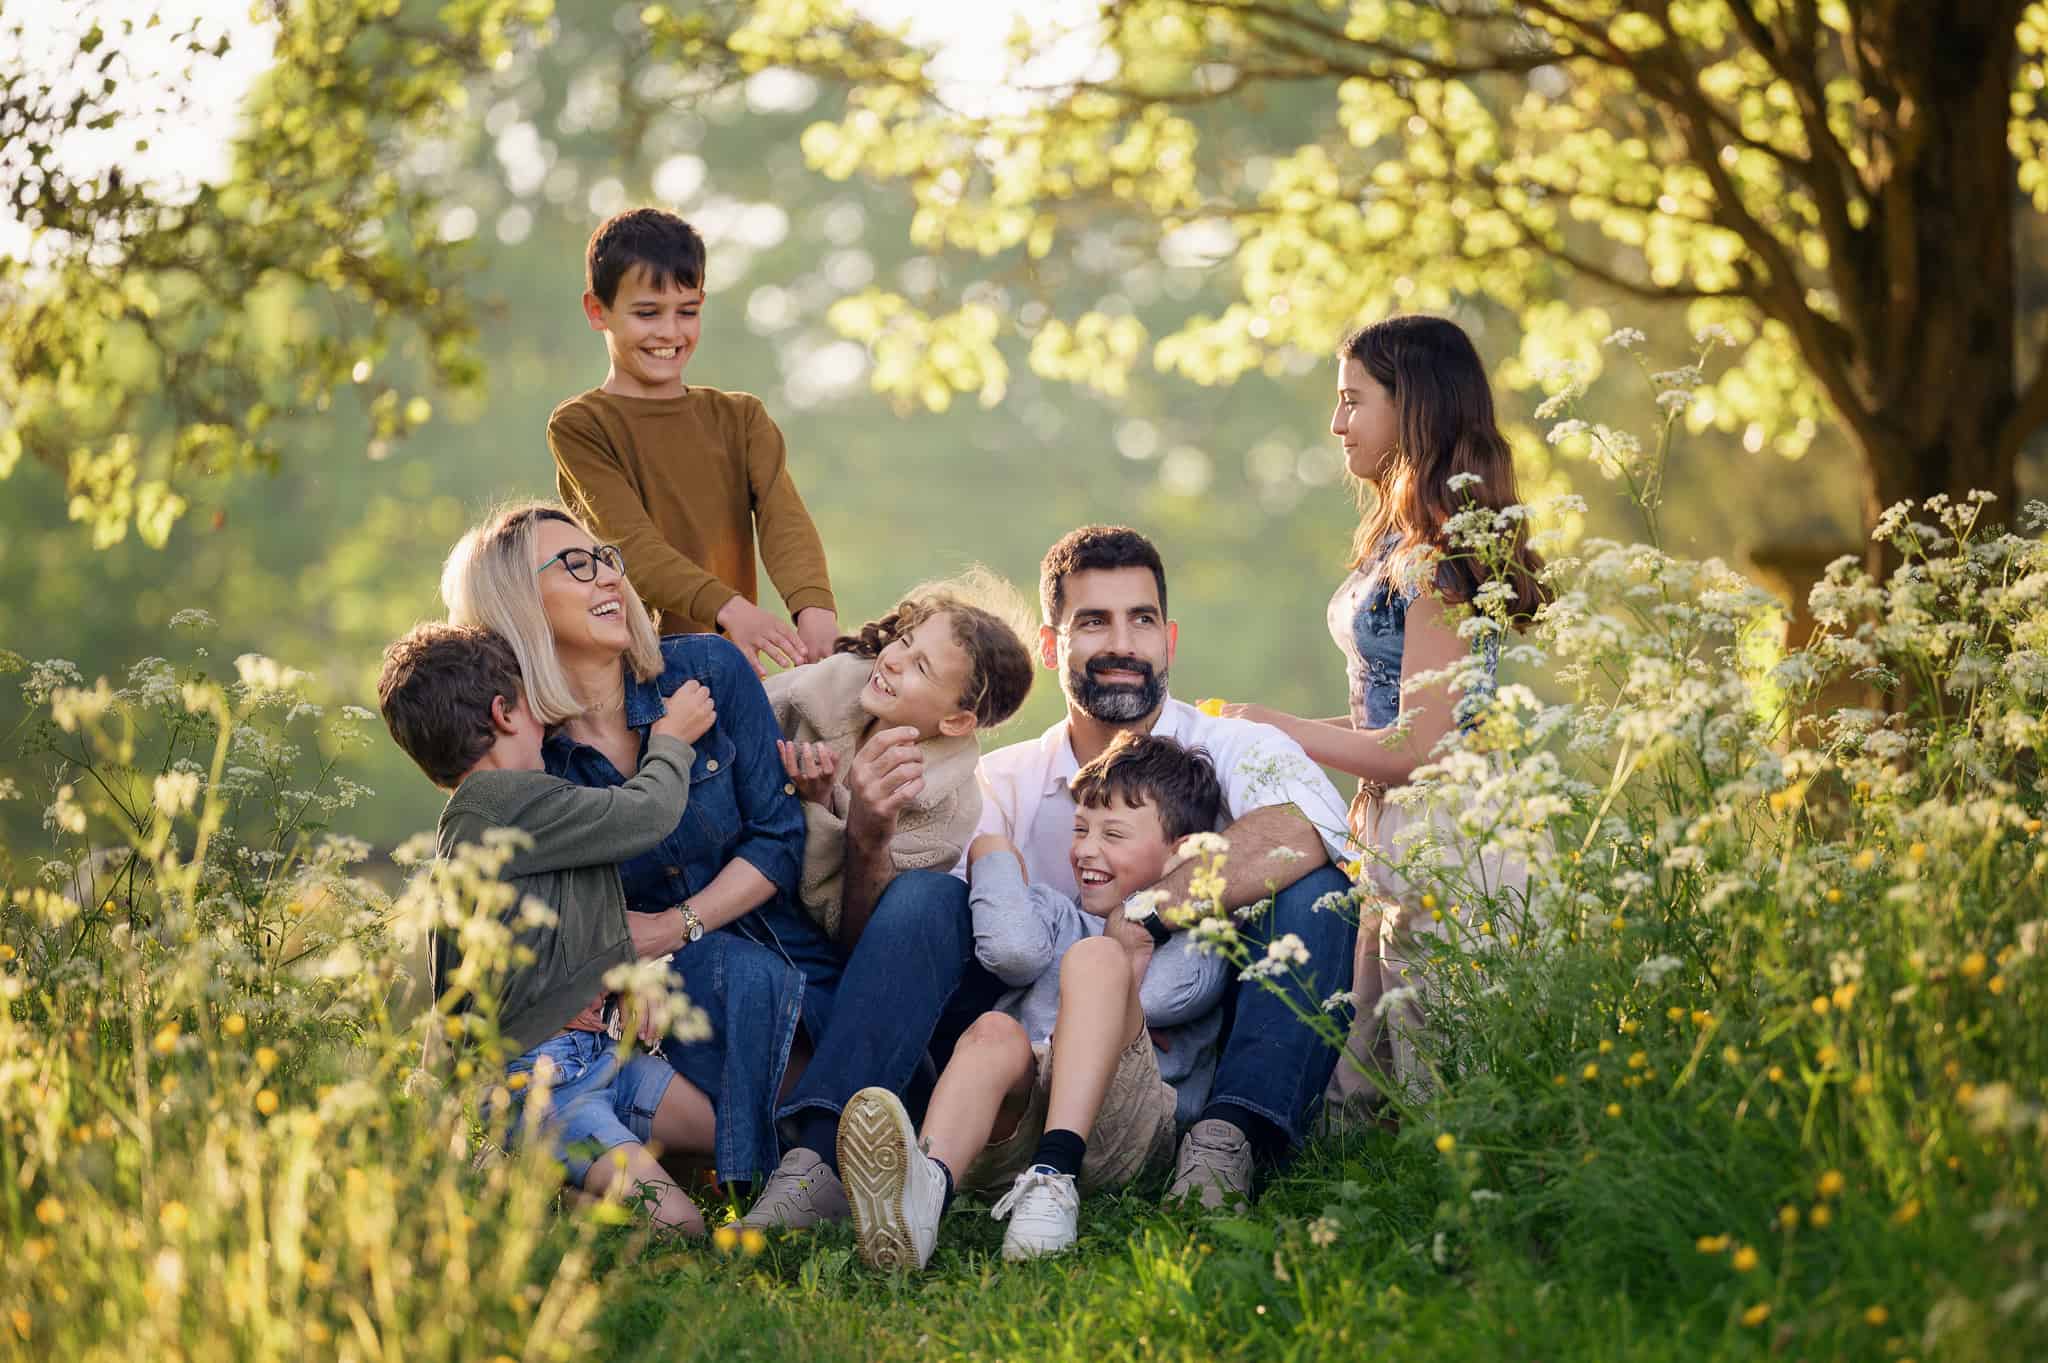 Photograph of a family sitting in a field surrounded by flowers. They are laughing and tickling each other.